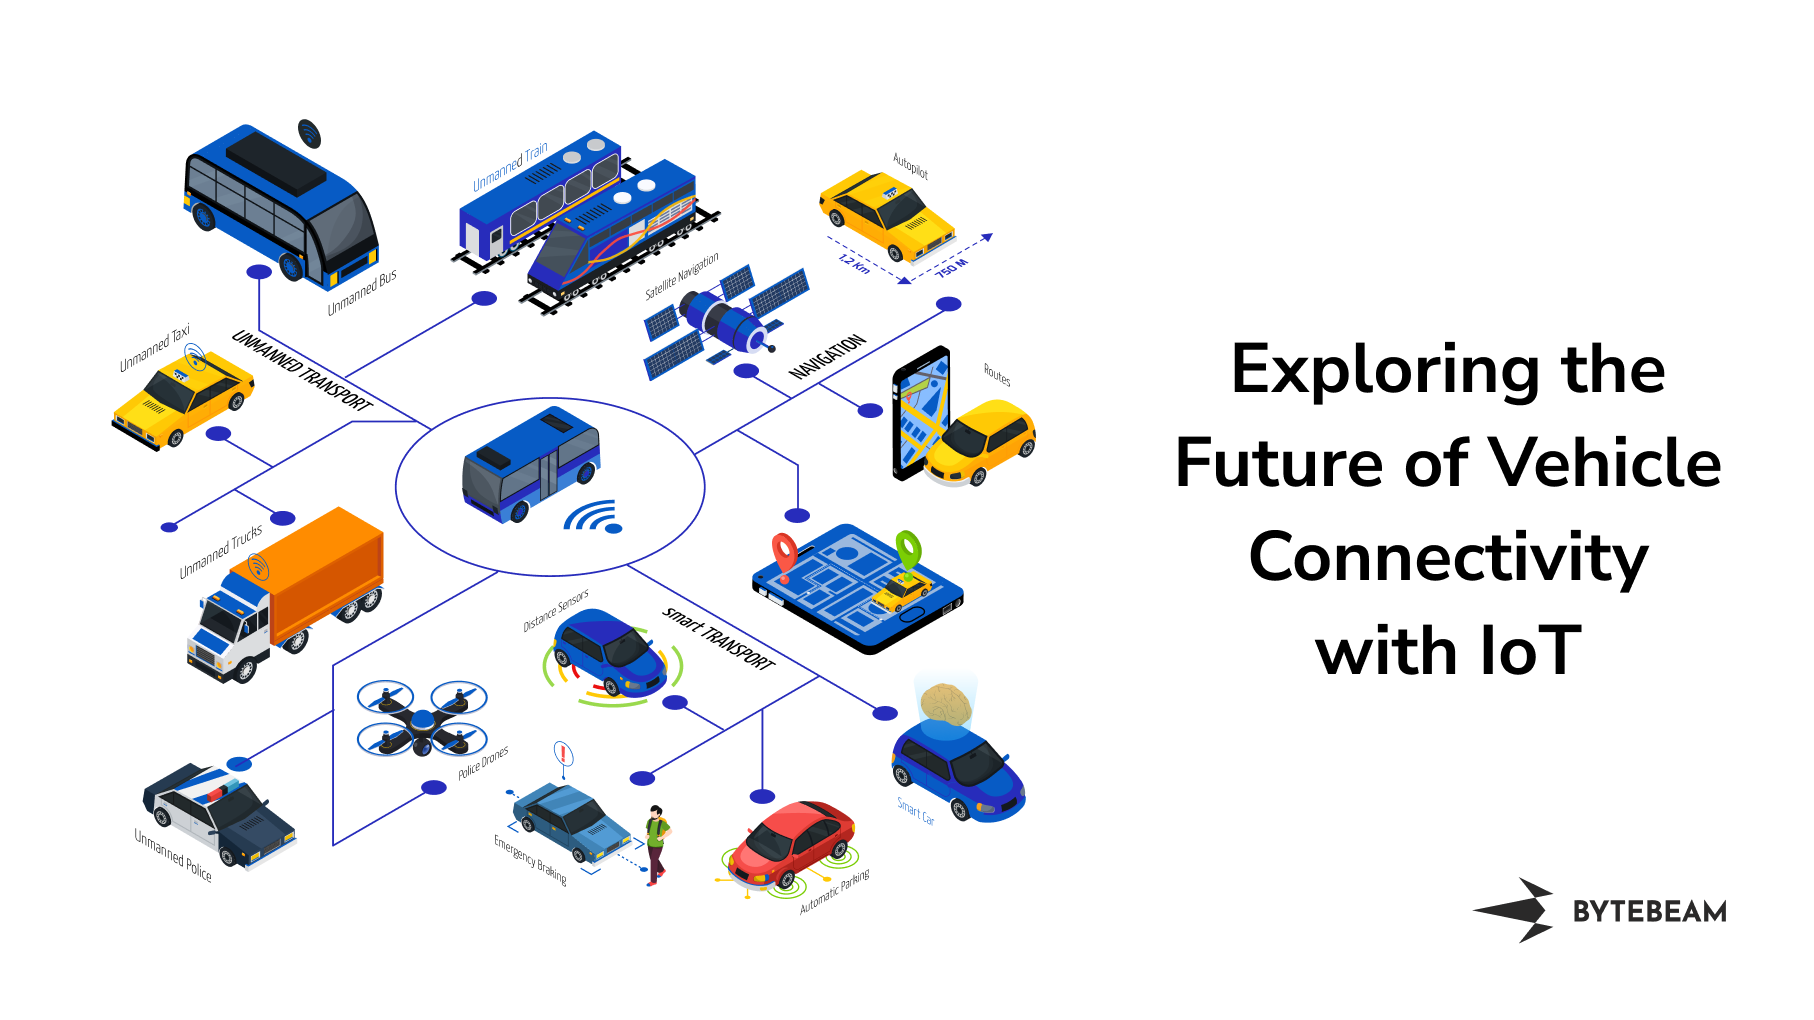 Exploring the Future of Vehicle Connectivity with IoT